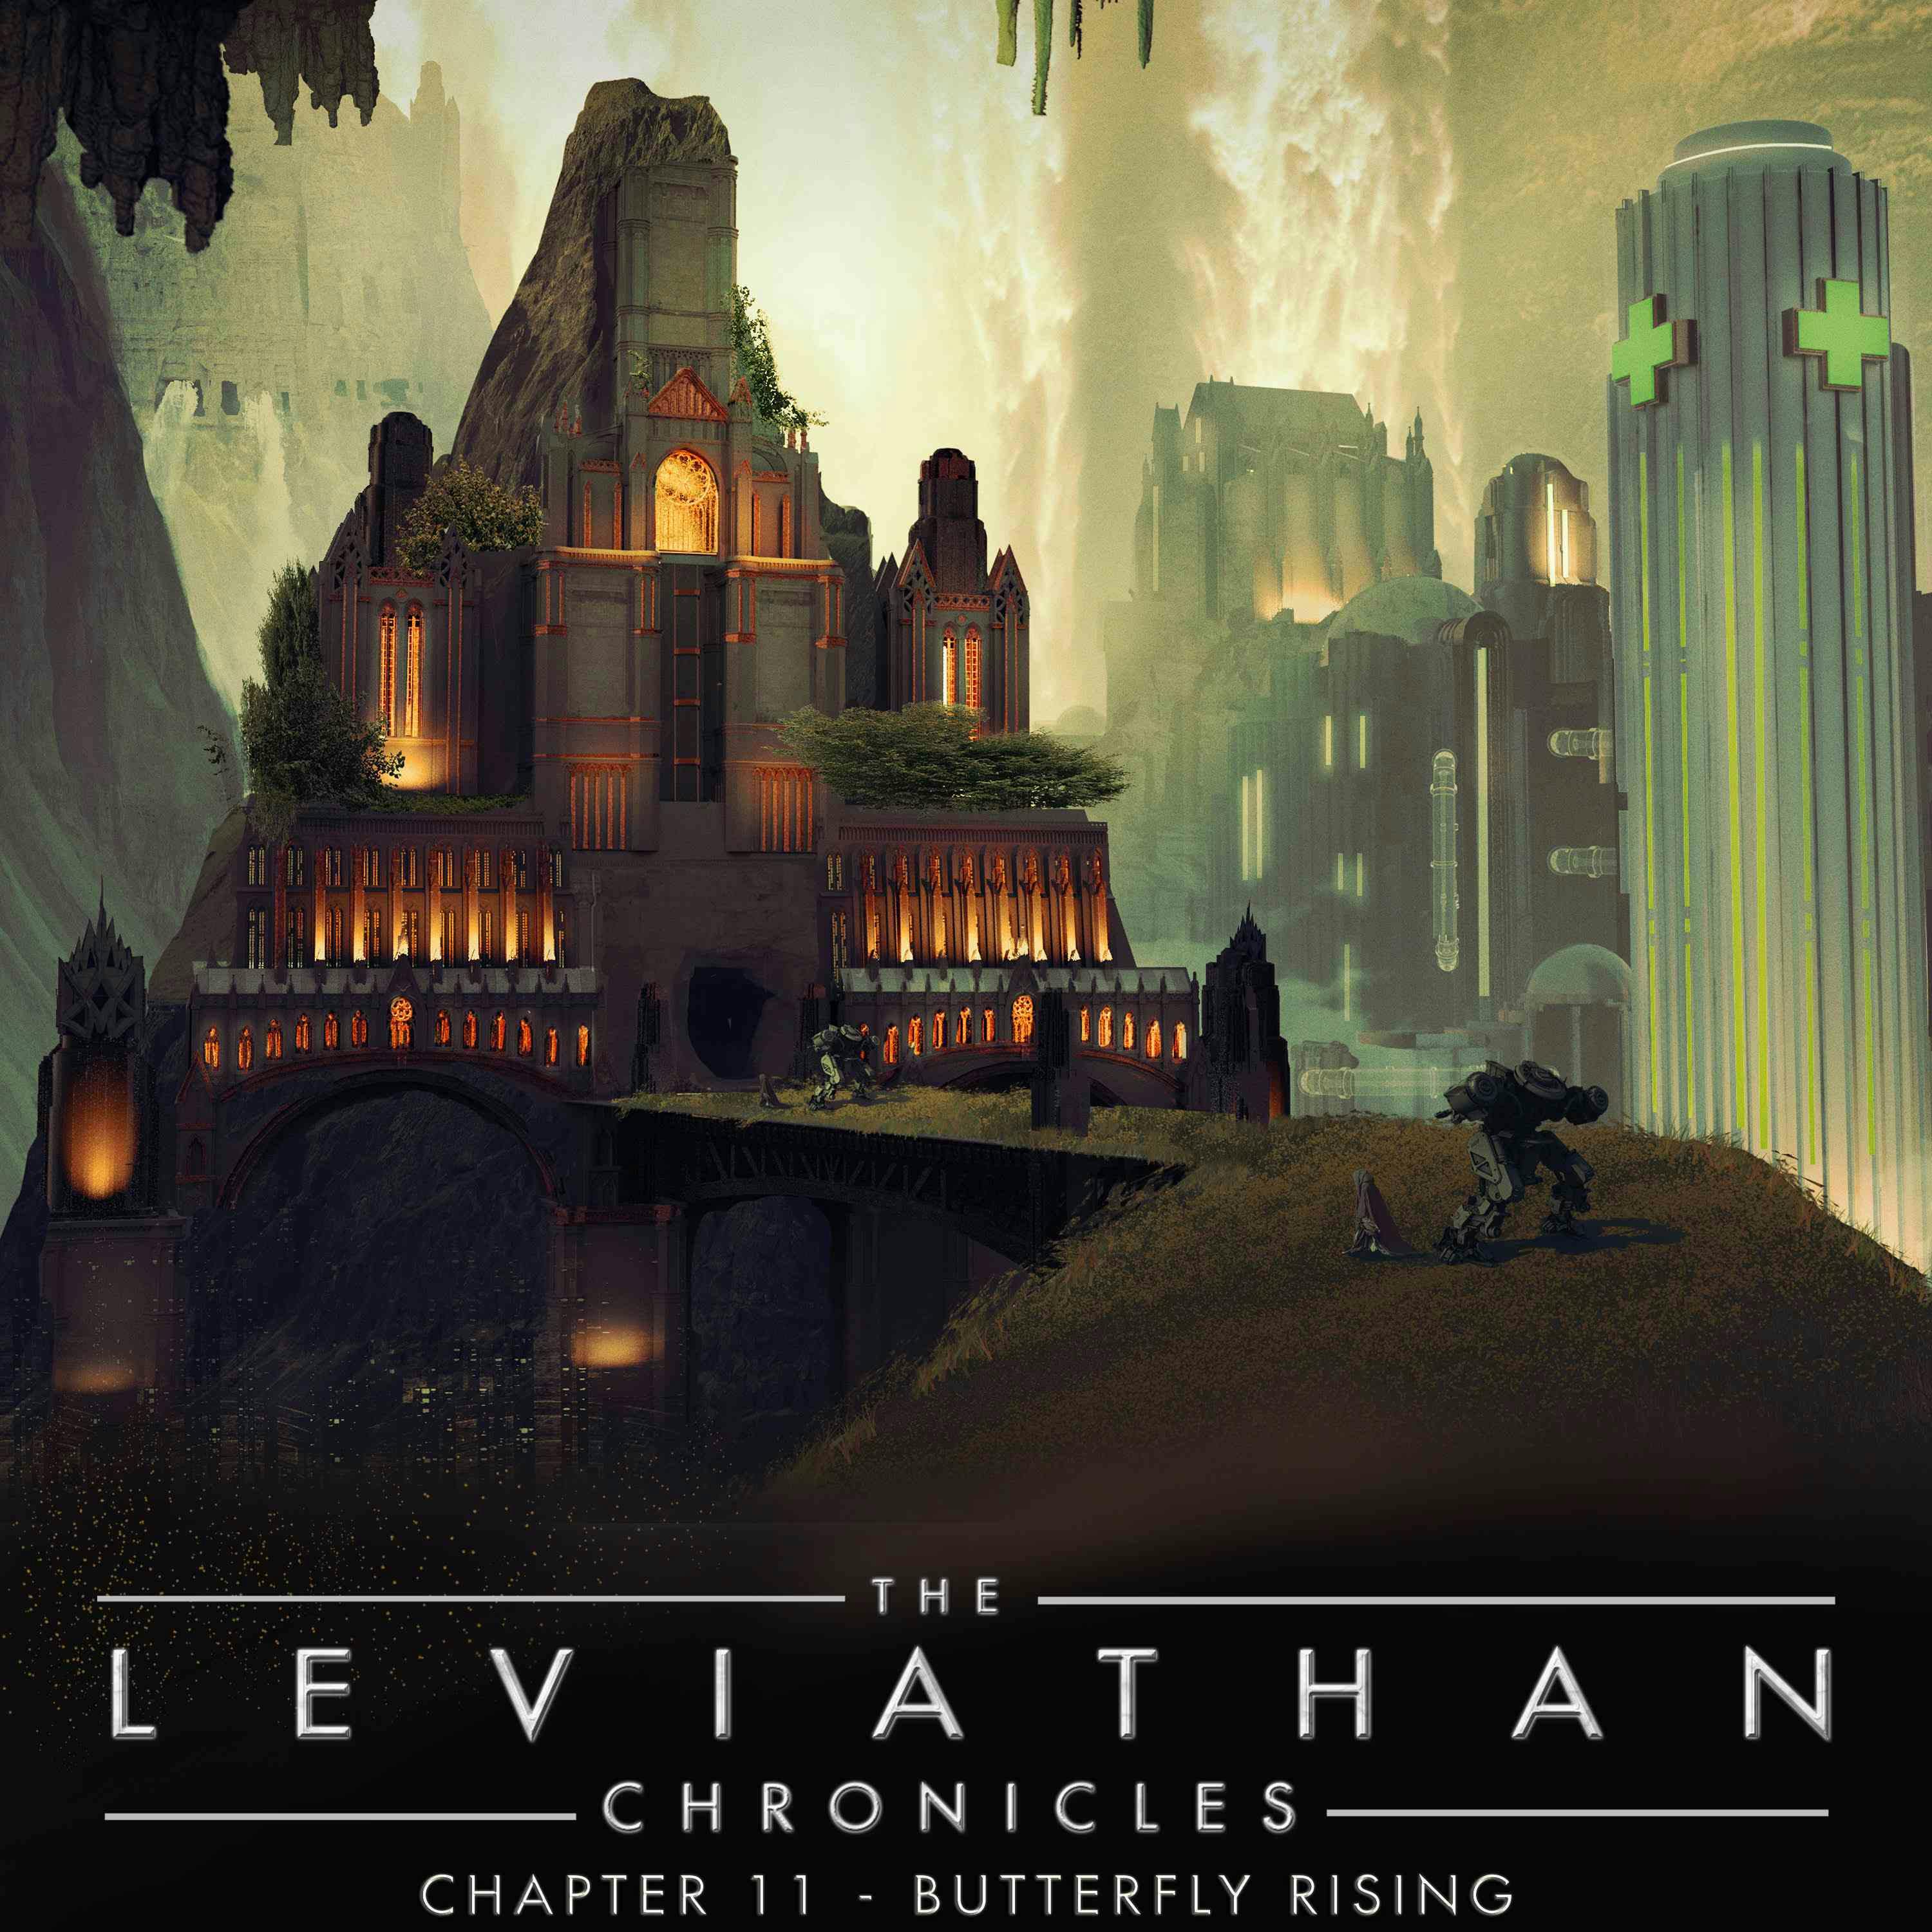 The Leviathan Chronicles | Chapter 11 - Butterfly Rising